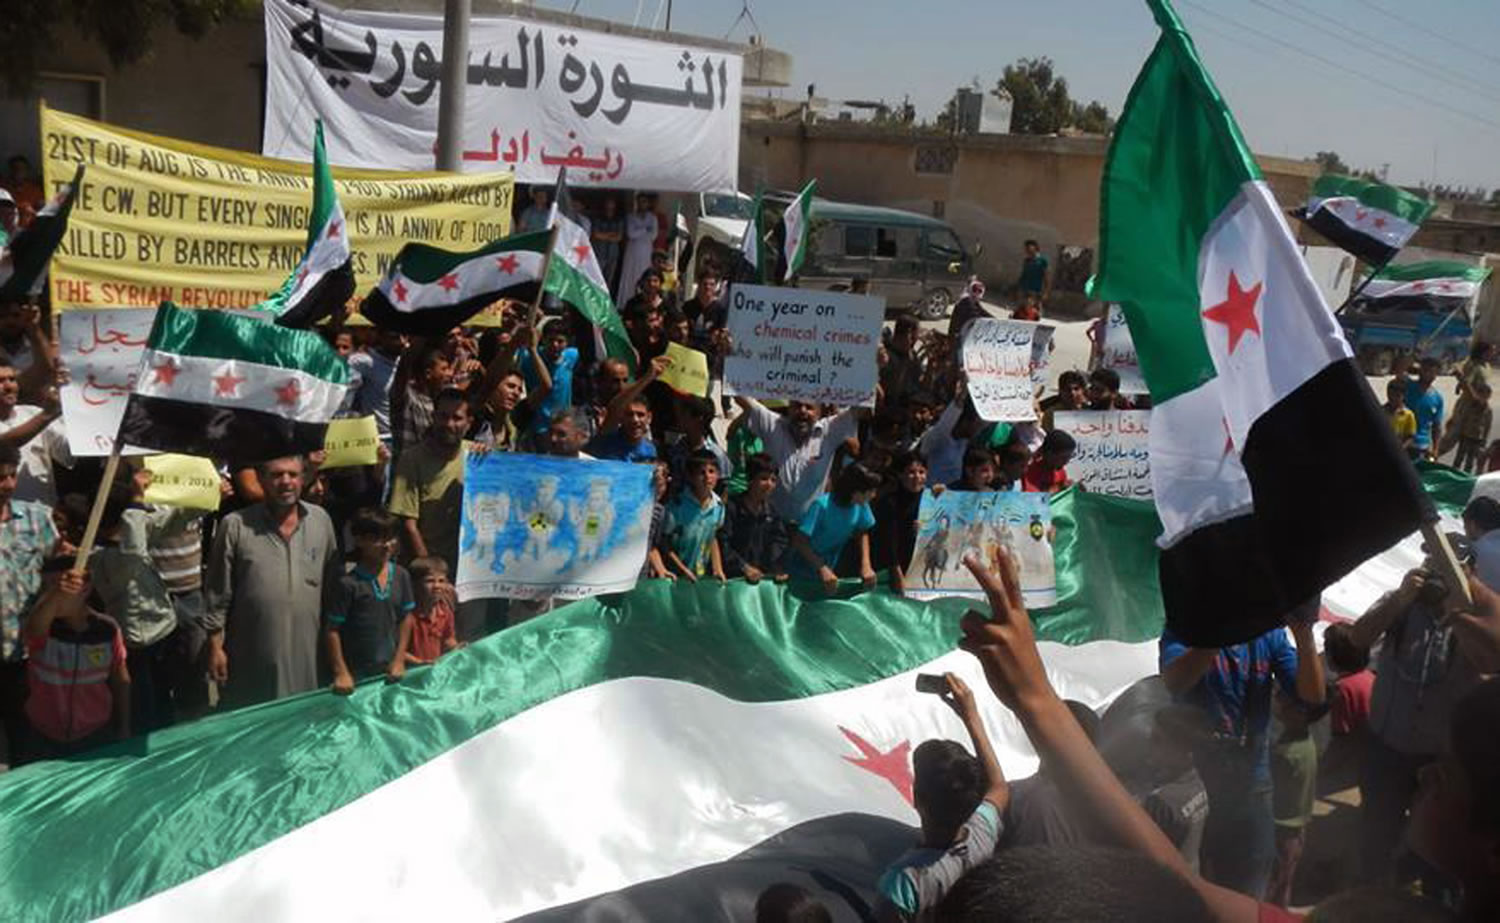 Anti-Syrian government protesters carry banners and a giant Syrian revolution flag during a demonstration in Idlib province, northern Syria on Friday.